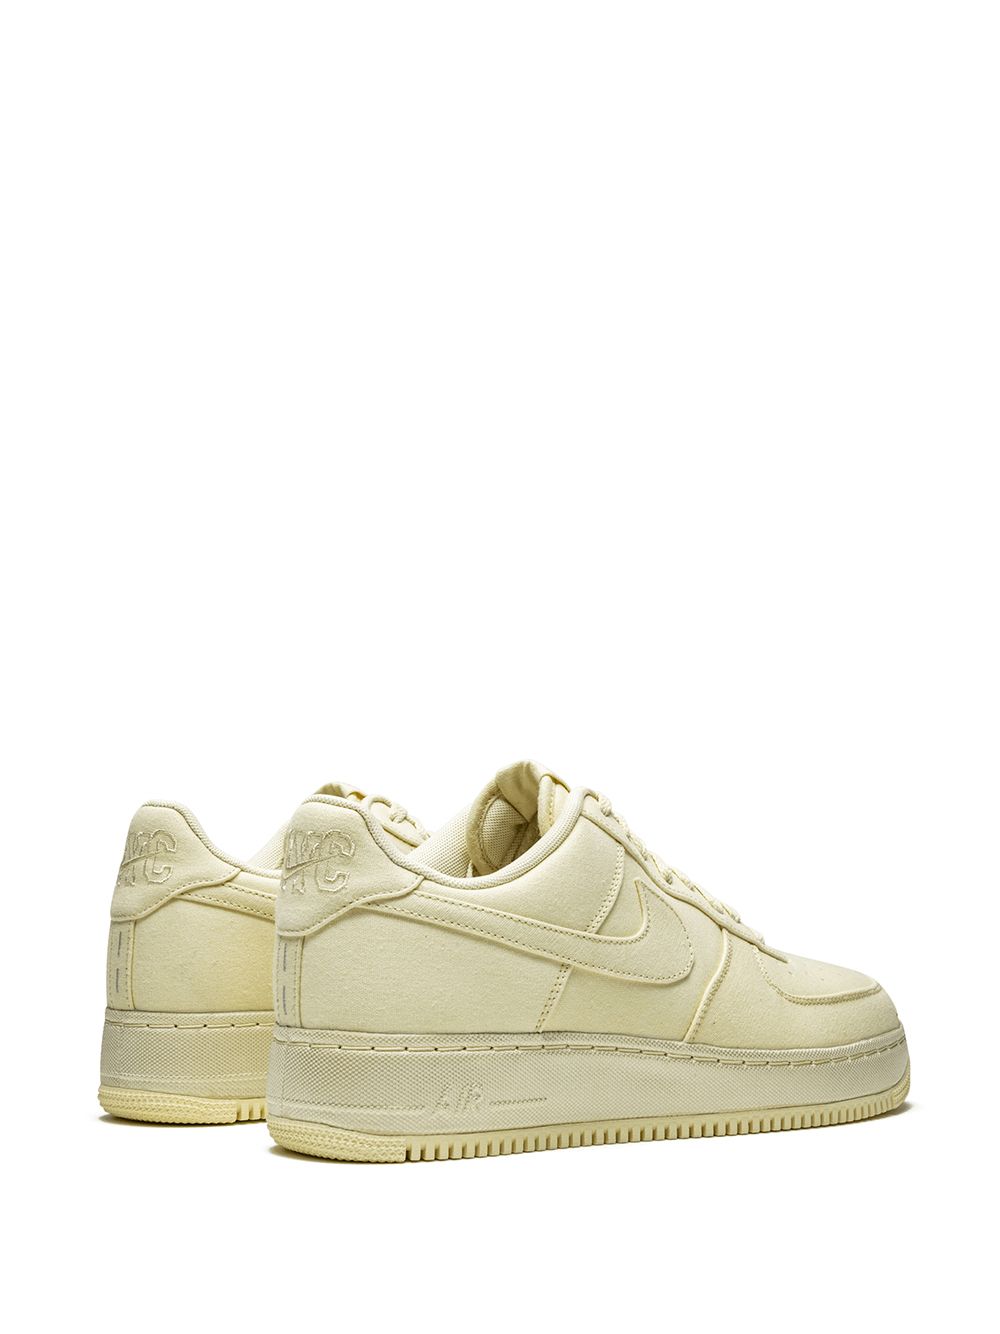 Nike Air Force 1 Low NYC Editions: Procella